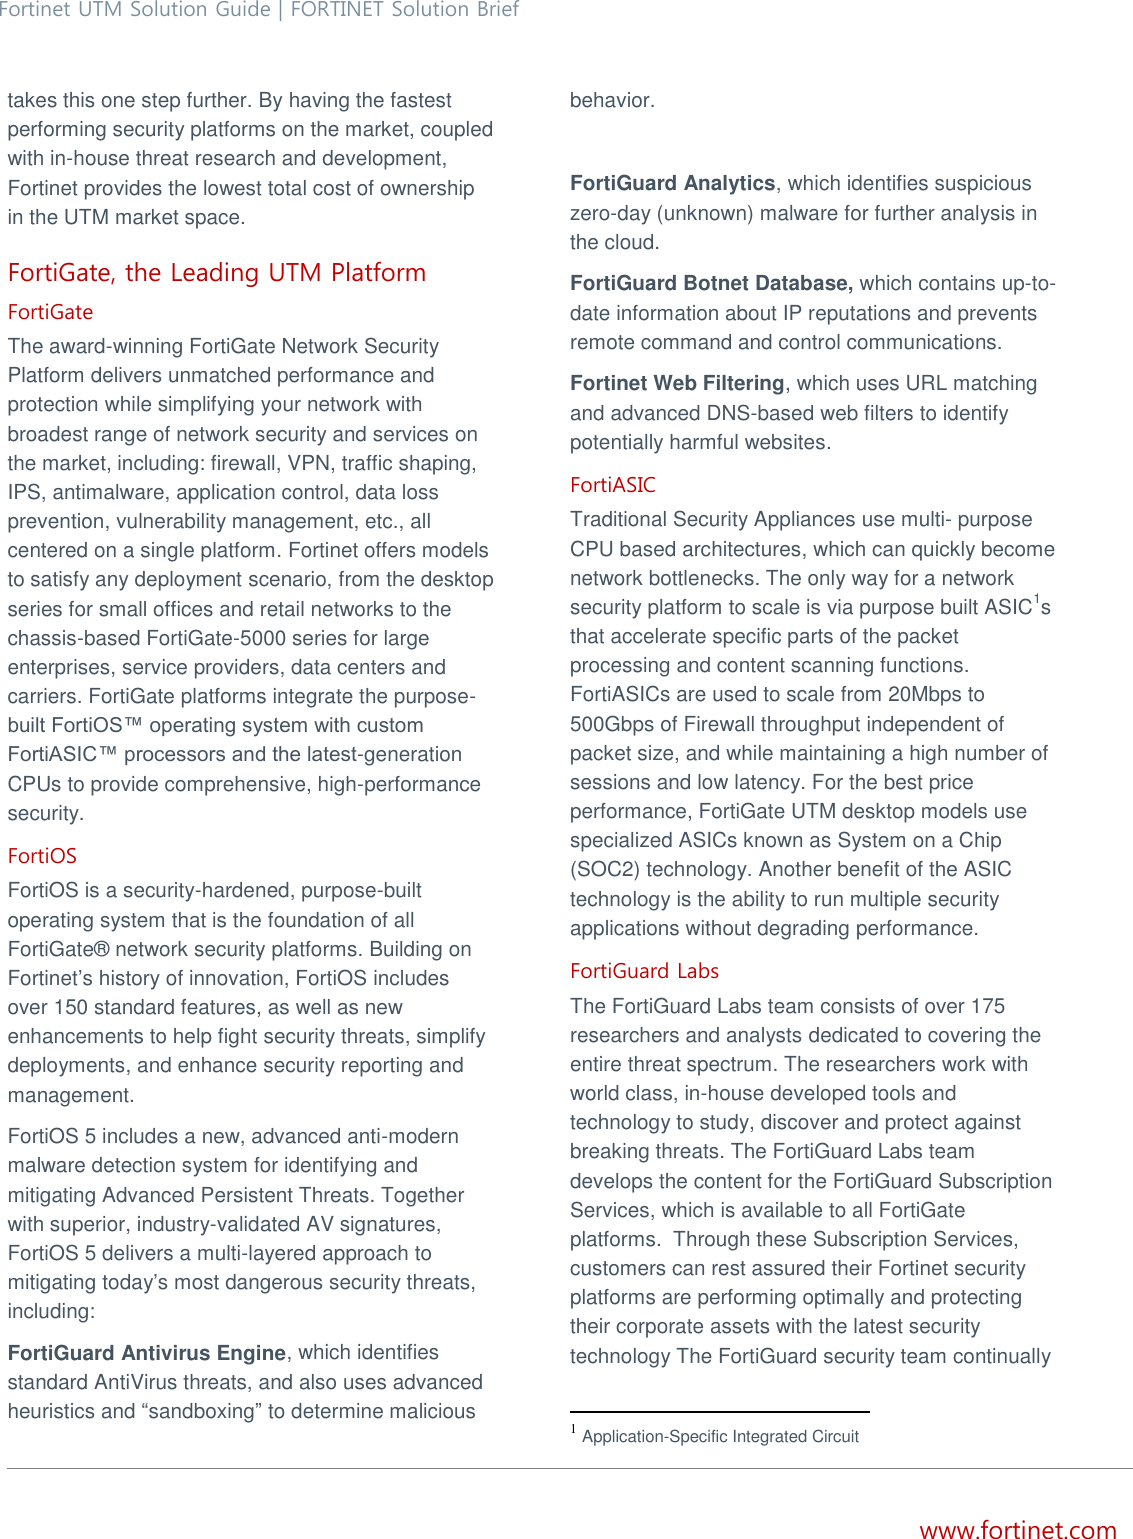 Page 2 of 3 - Fortinet Case Study  UTMSolution Brief